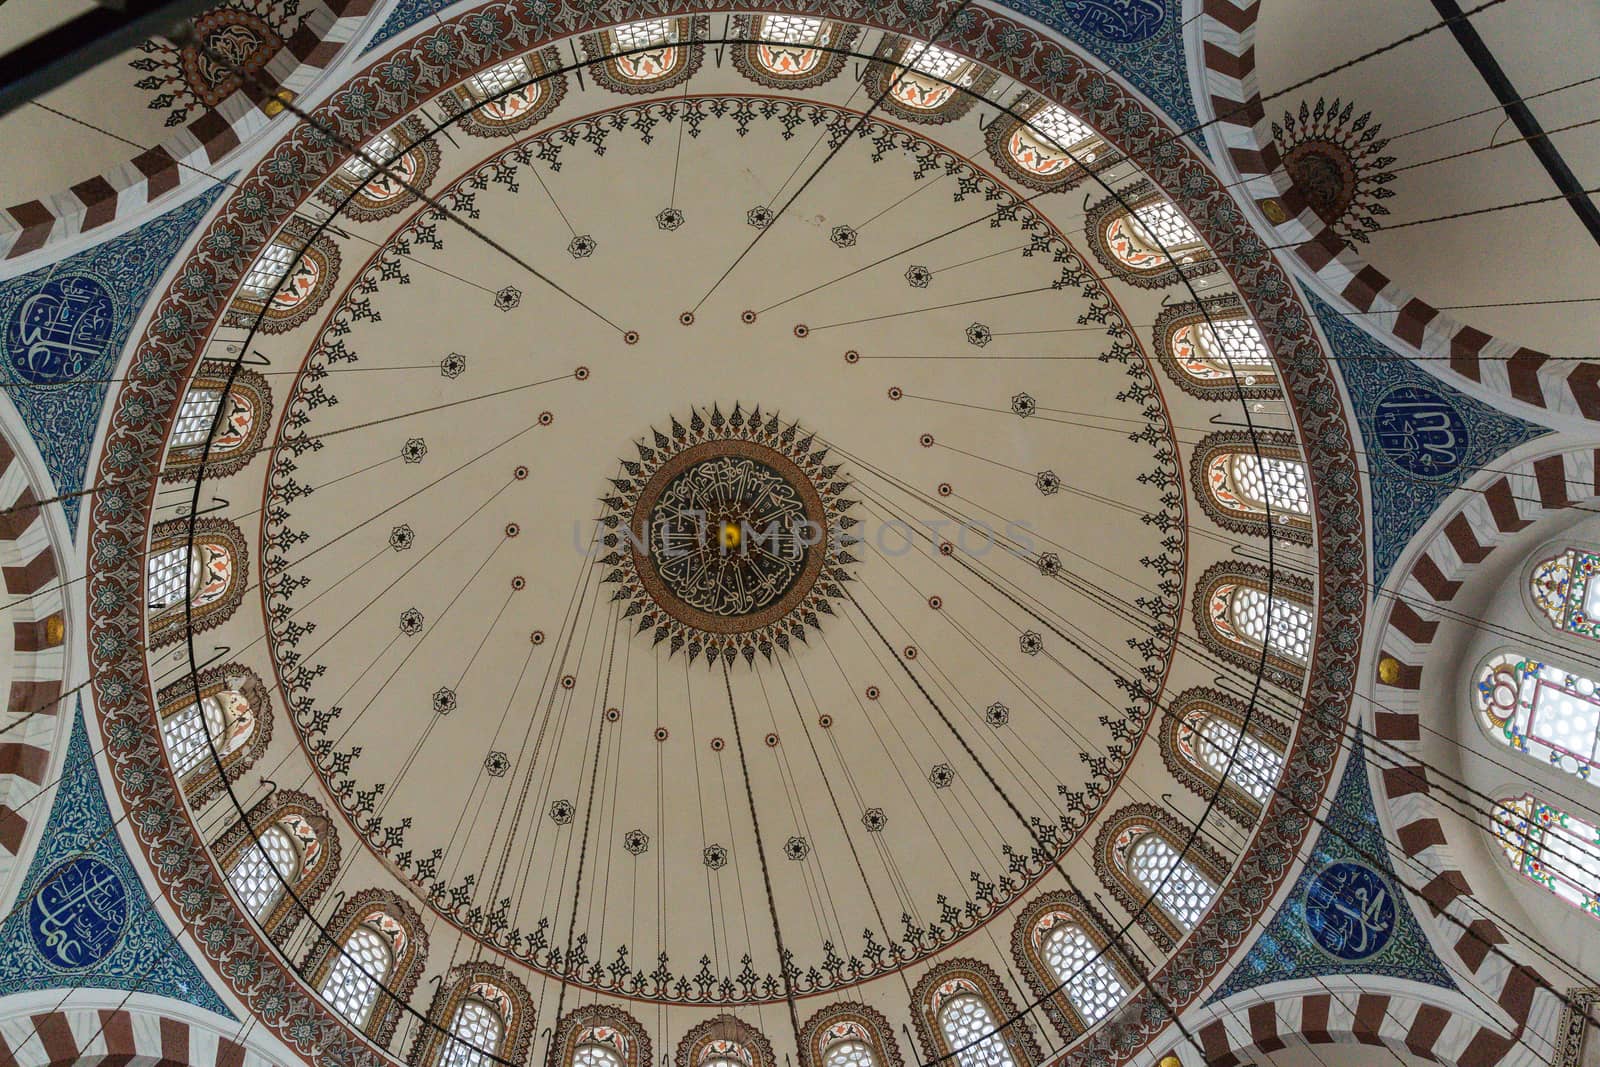 The ceiling of a mosque by chrisukphoto